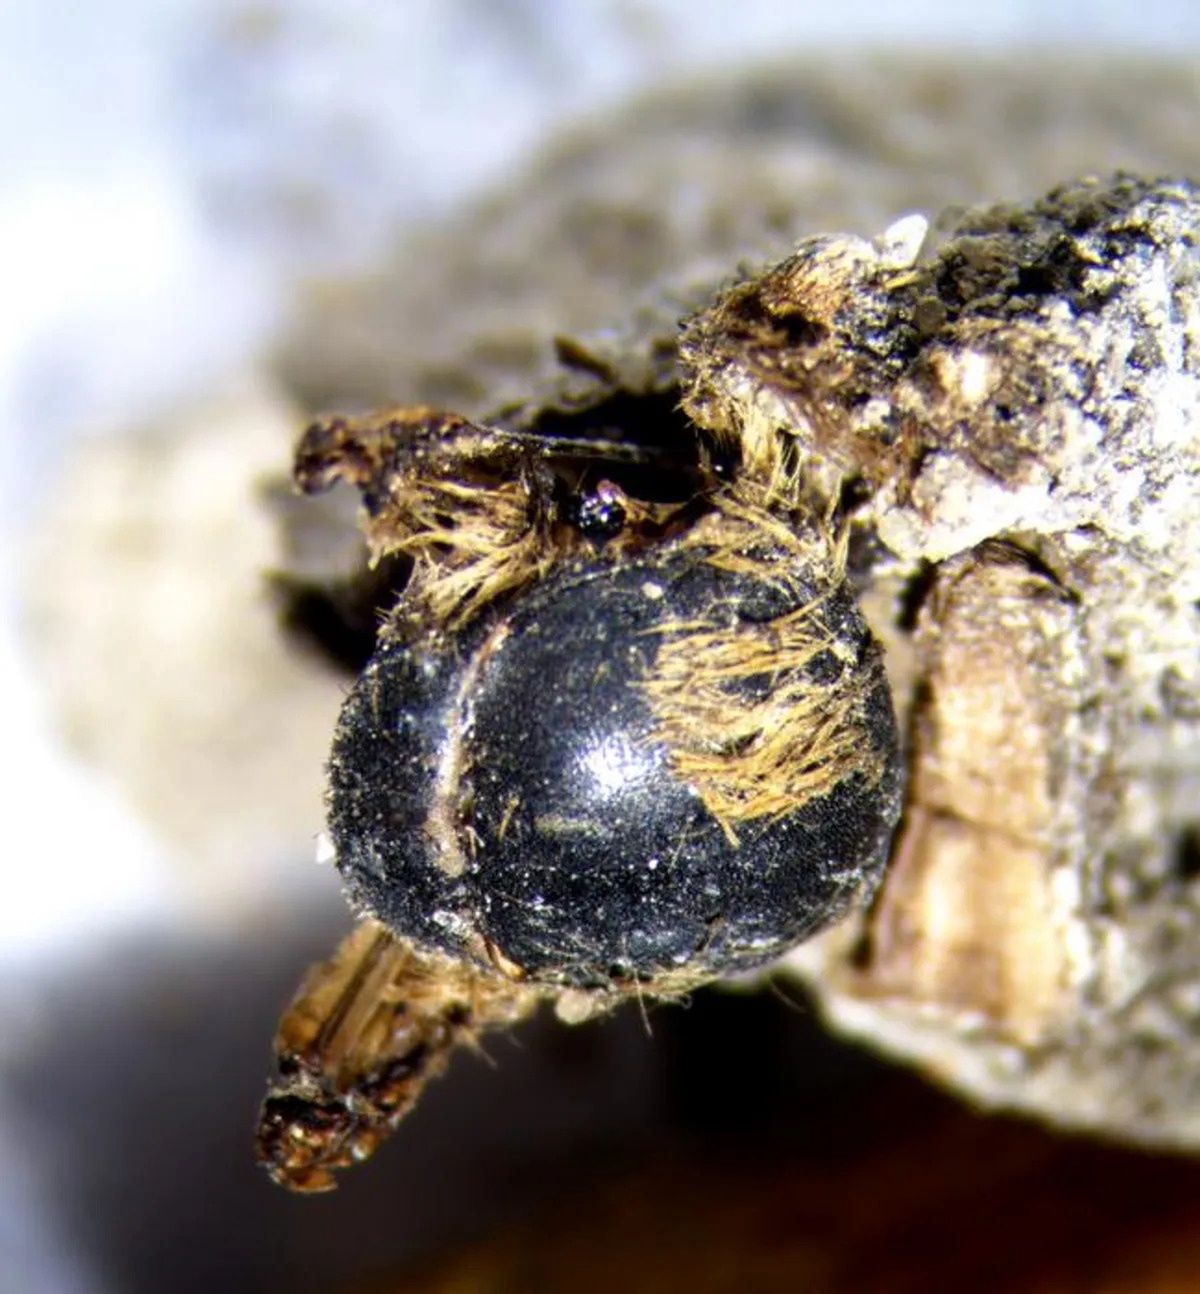 The back of the fossilized bee